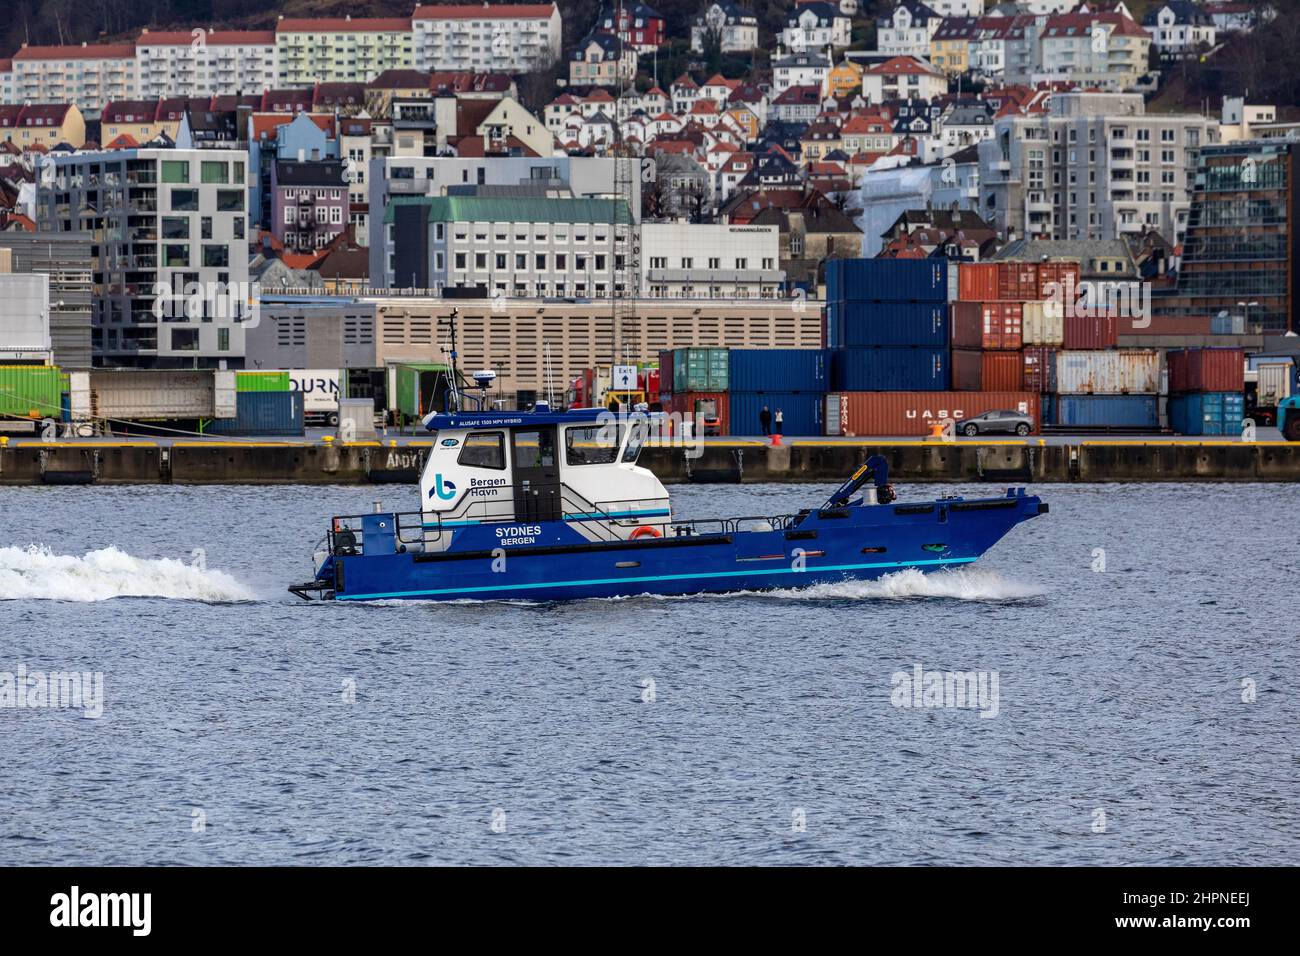 MB 'Sydnes', Bergen port authority's maintenance and service boat,  in port of Bergen, Norway. Jekteviken terminal in background Stock Photo